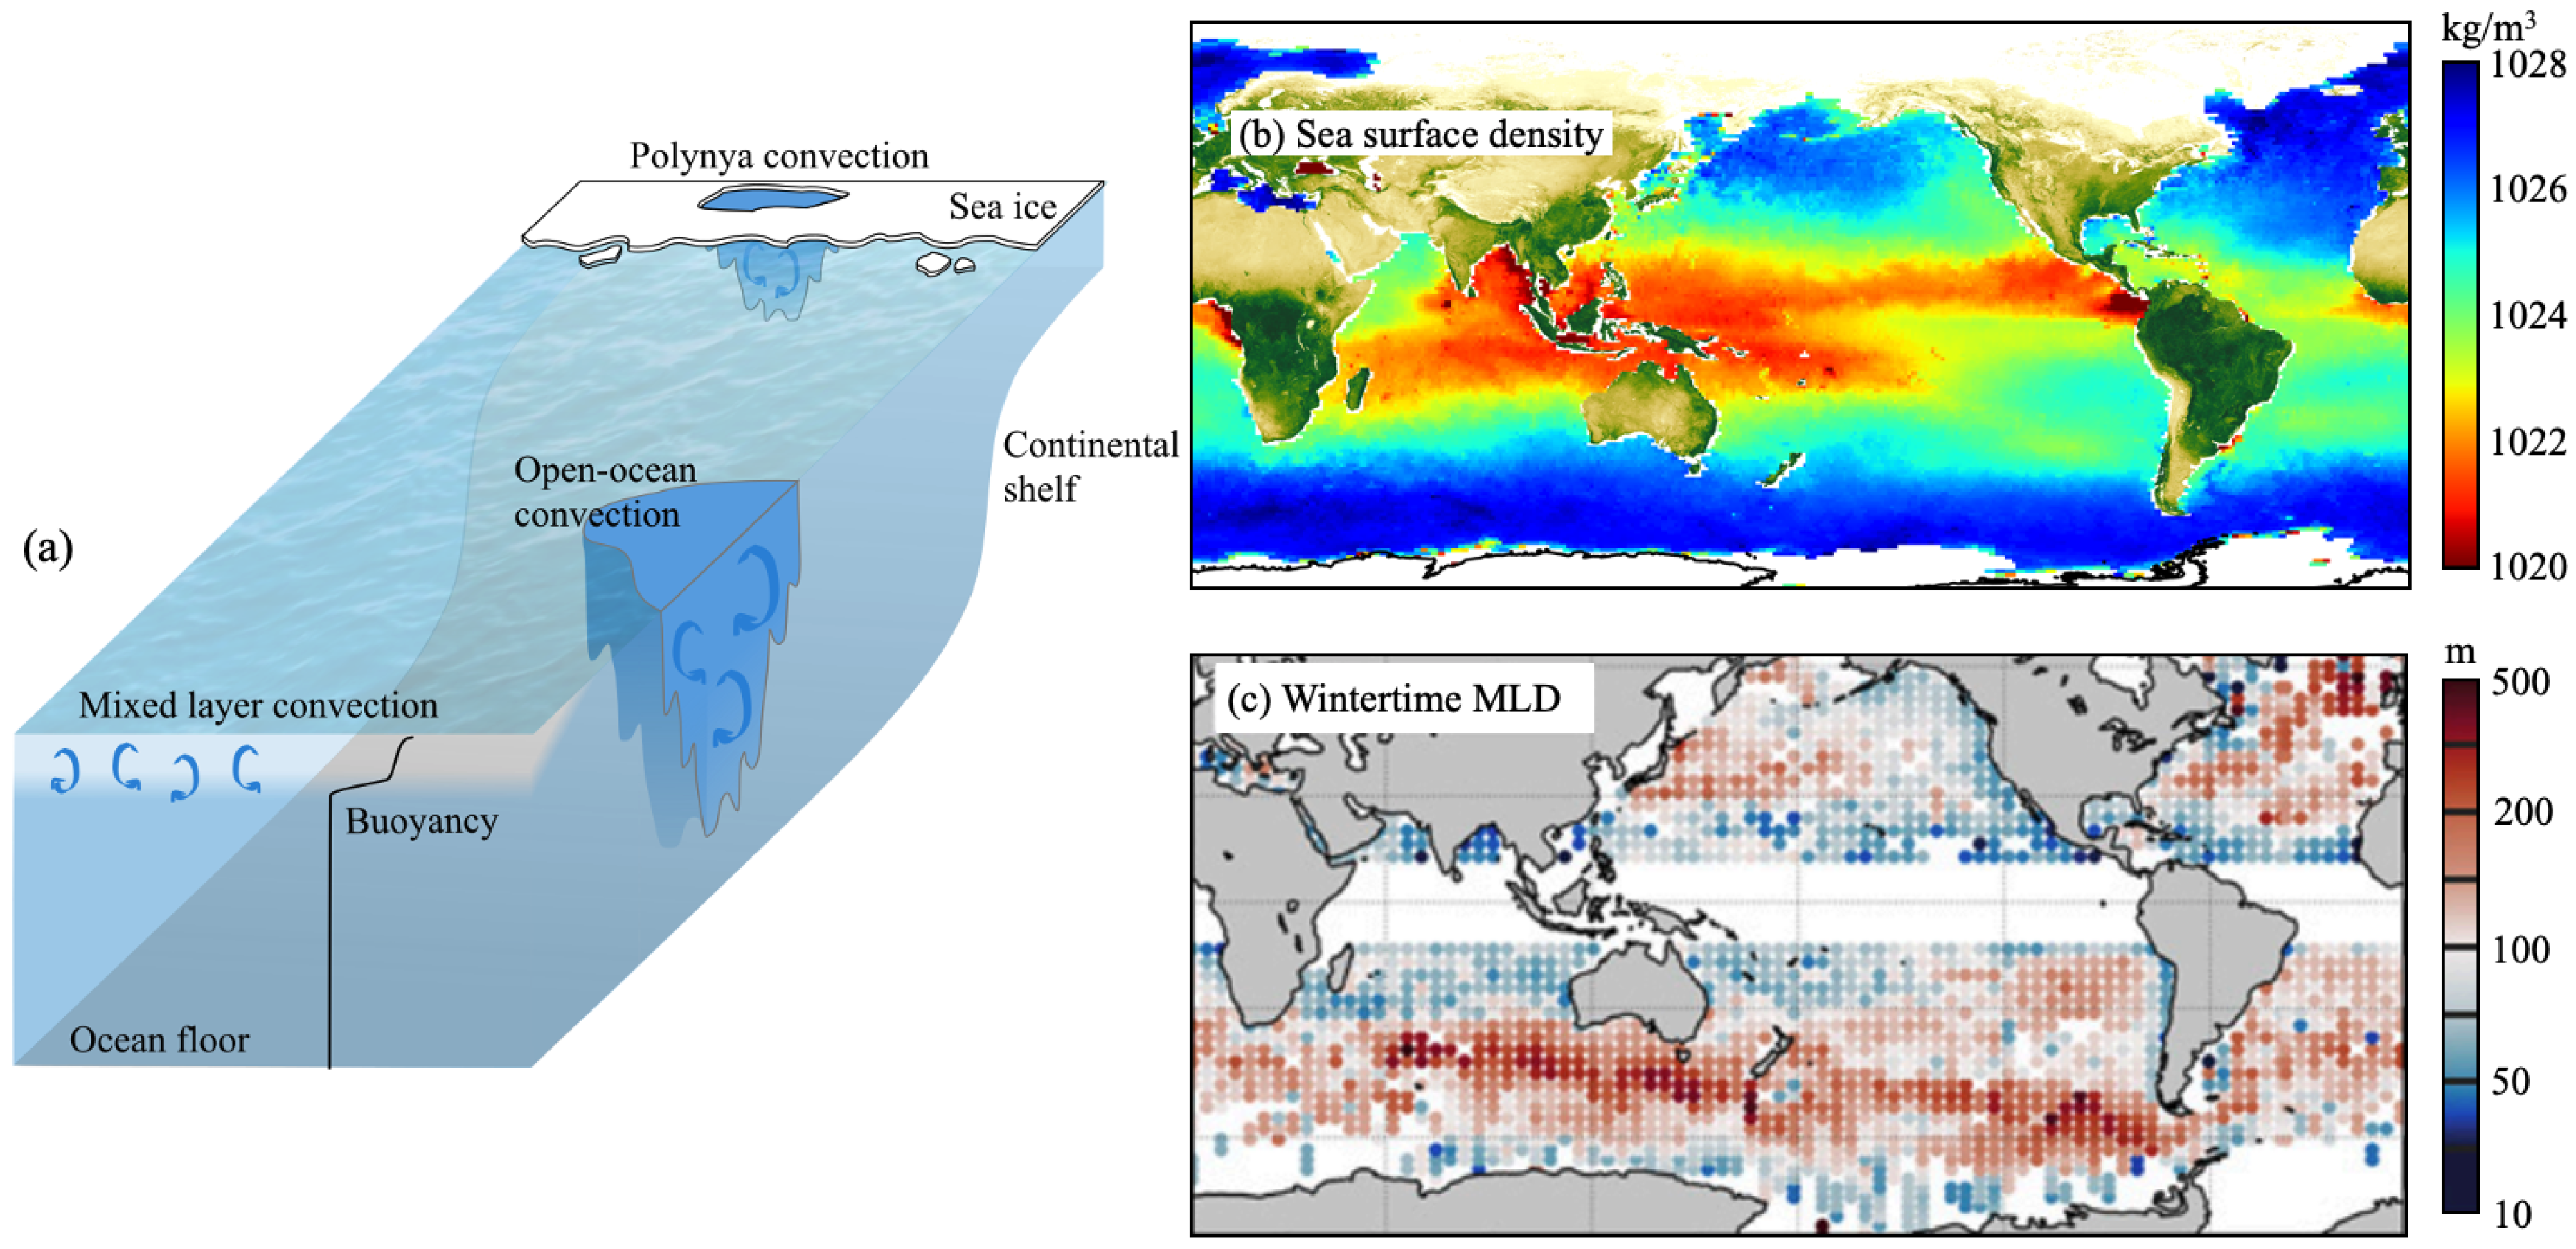 Full article: Different Generating Mechanisms for the Summer Surface Cold  Patches in the Yellow Sea